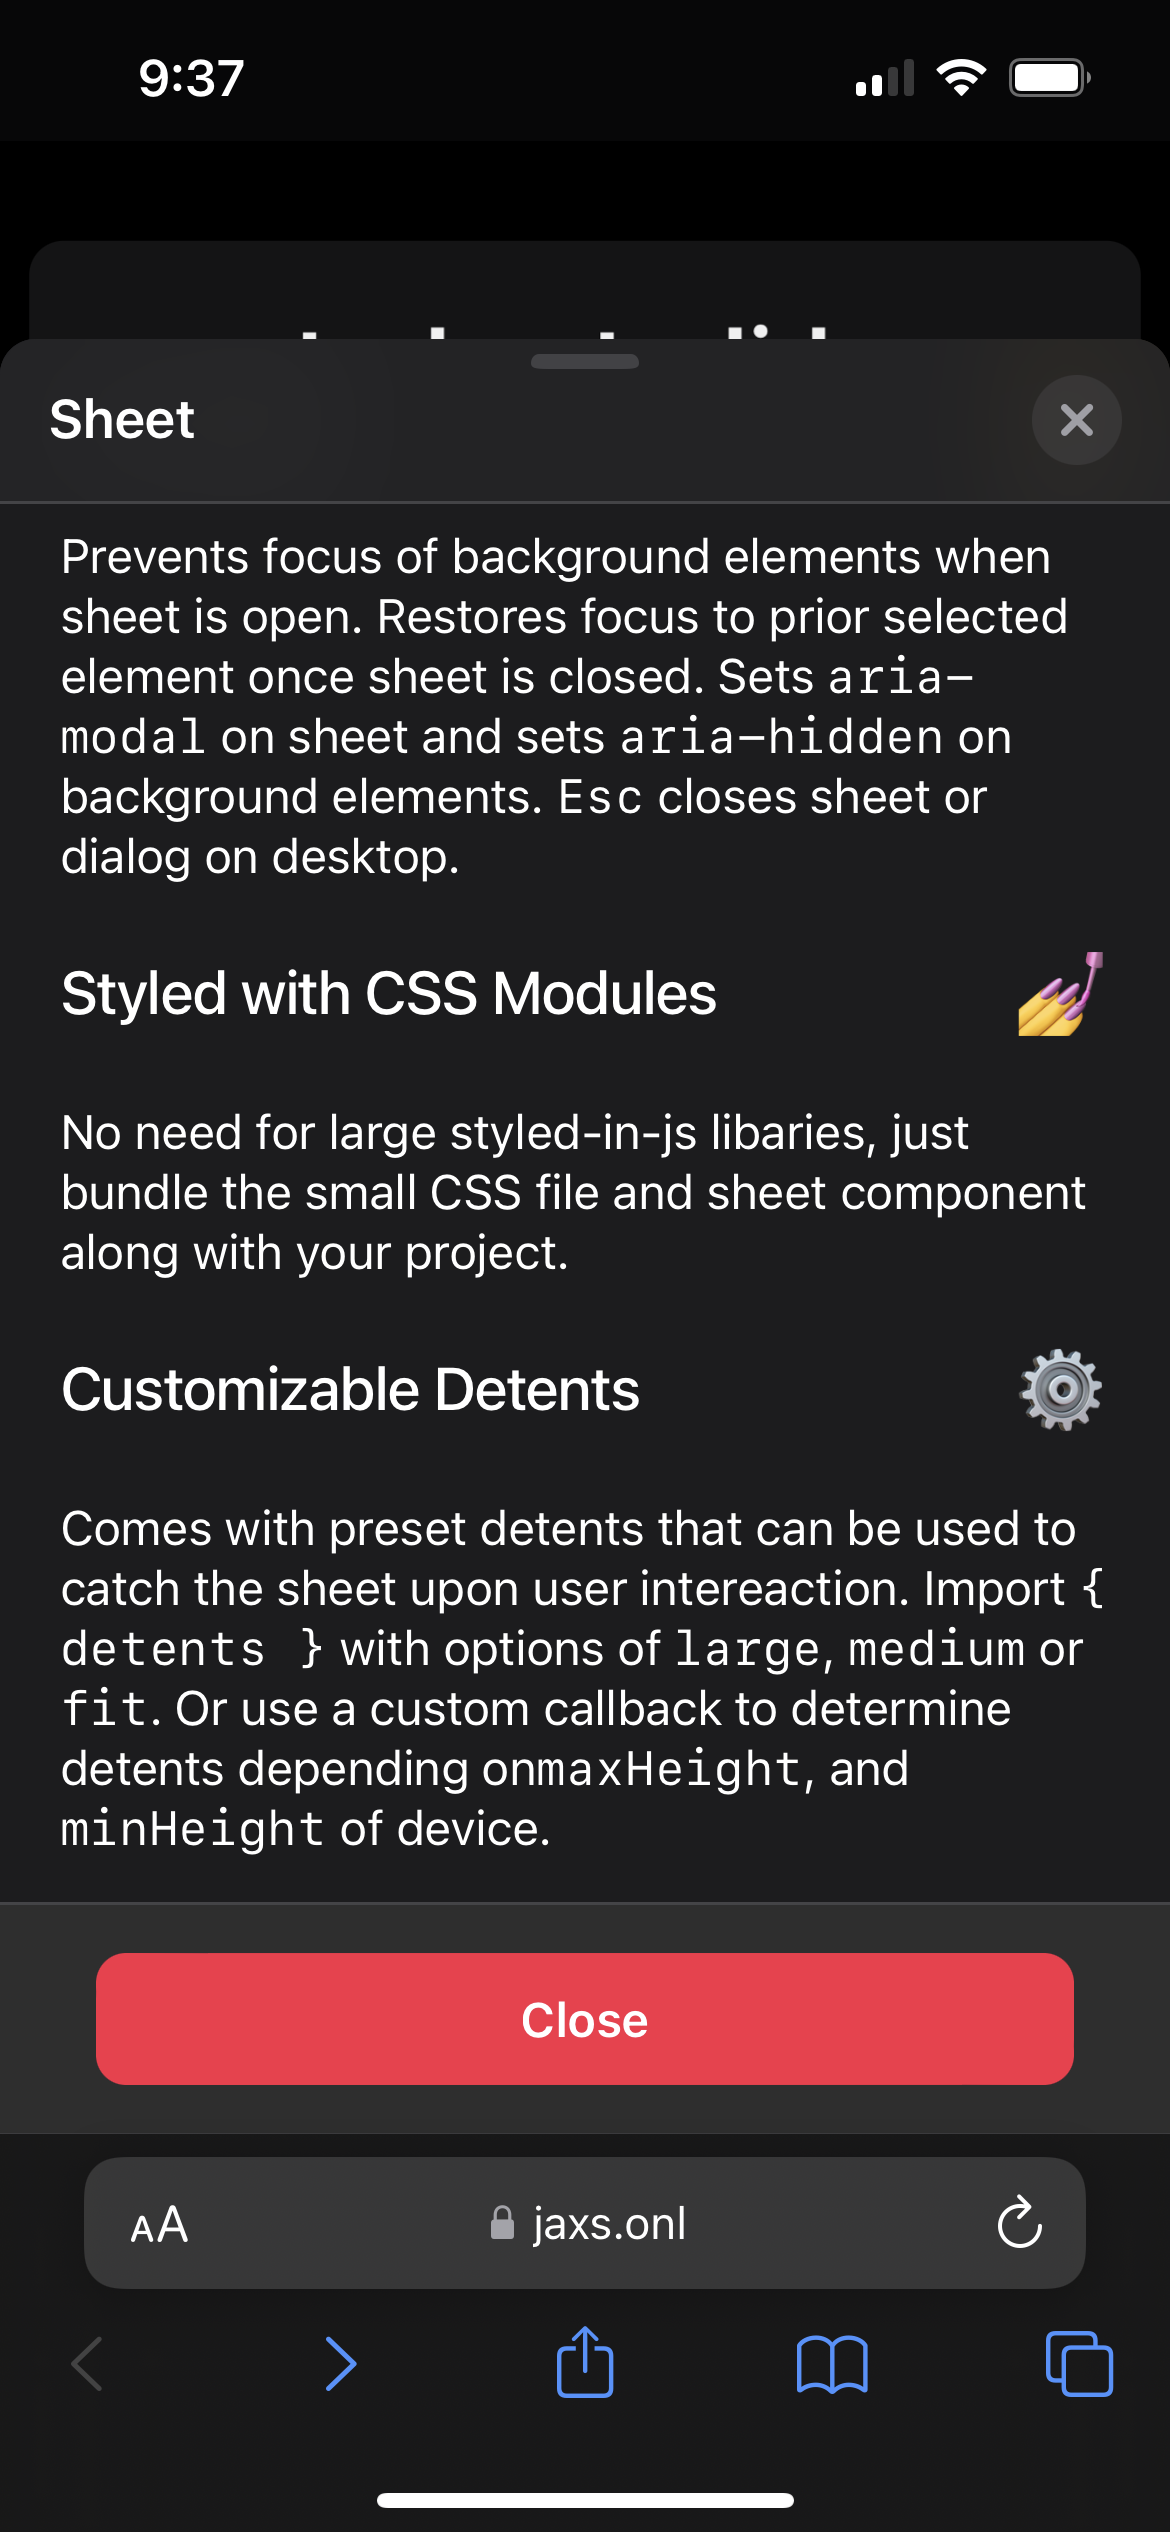 react-sheet-slide fully expanded and scrolled down in dark mode.